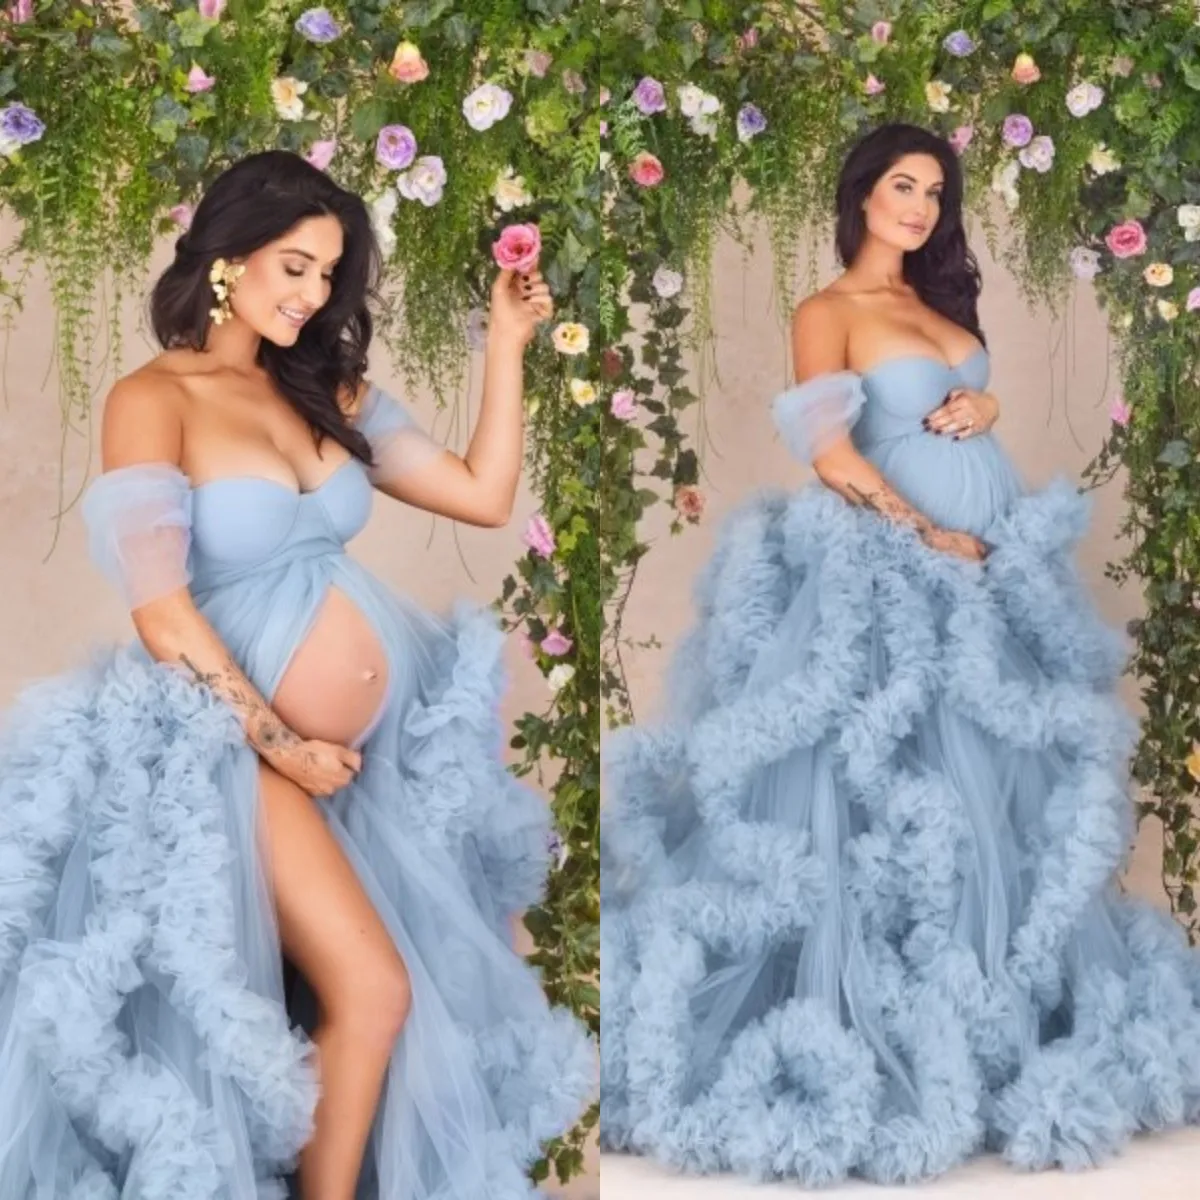 

Sky Blue Maternity Gowns Off The Shoulder Birthday Party Bathrobes Sweetheart Sleepwear for Phtotoshoot Custom Made